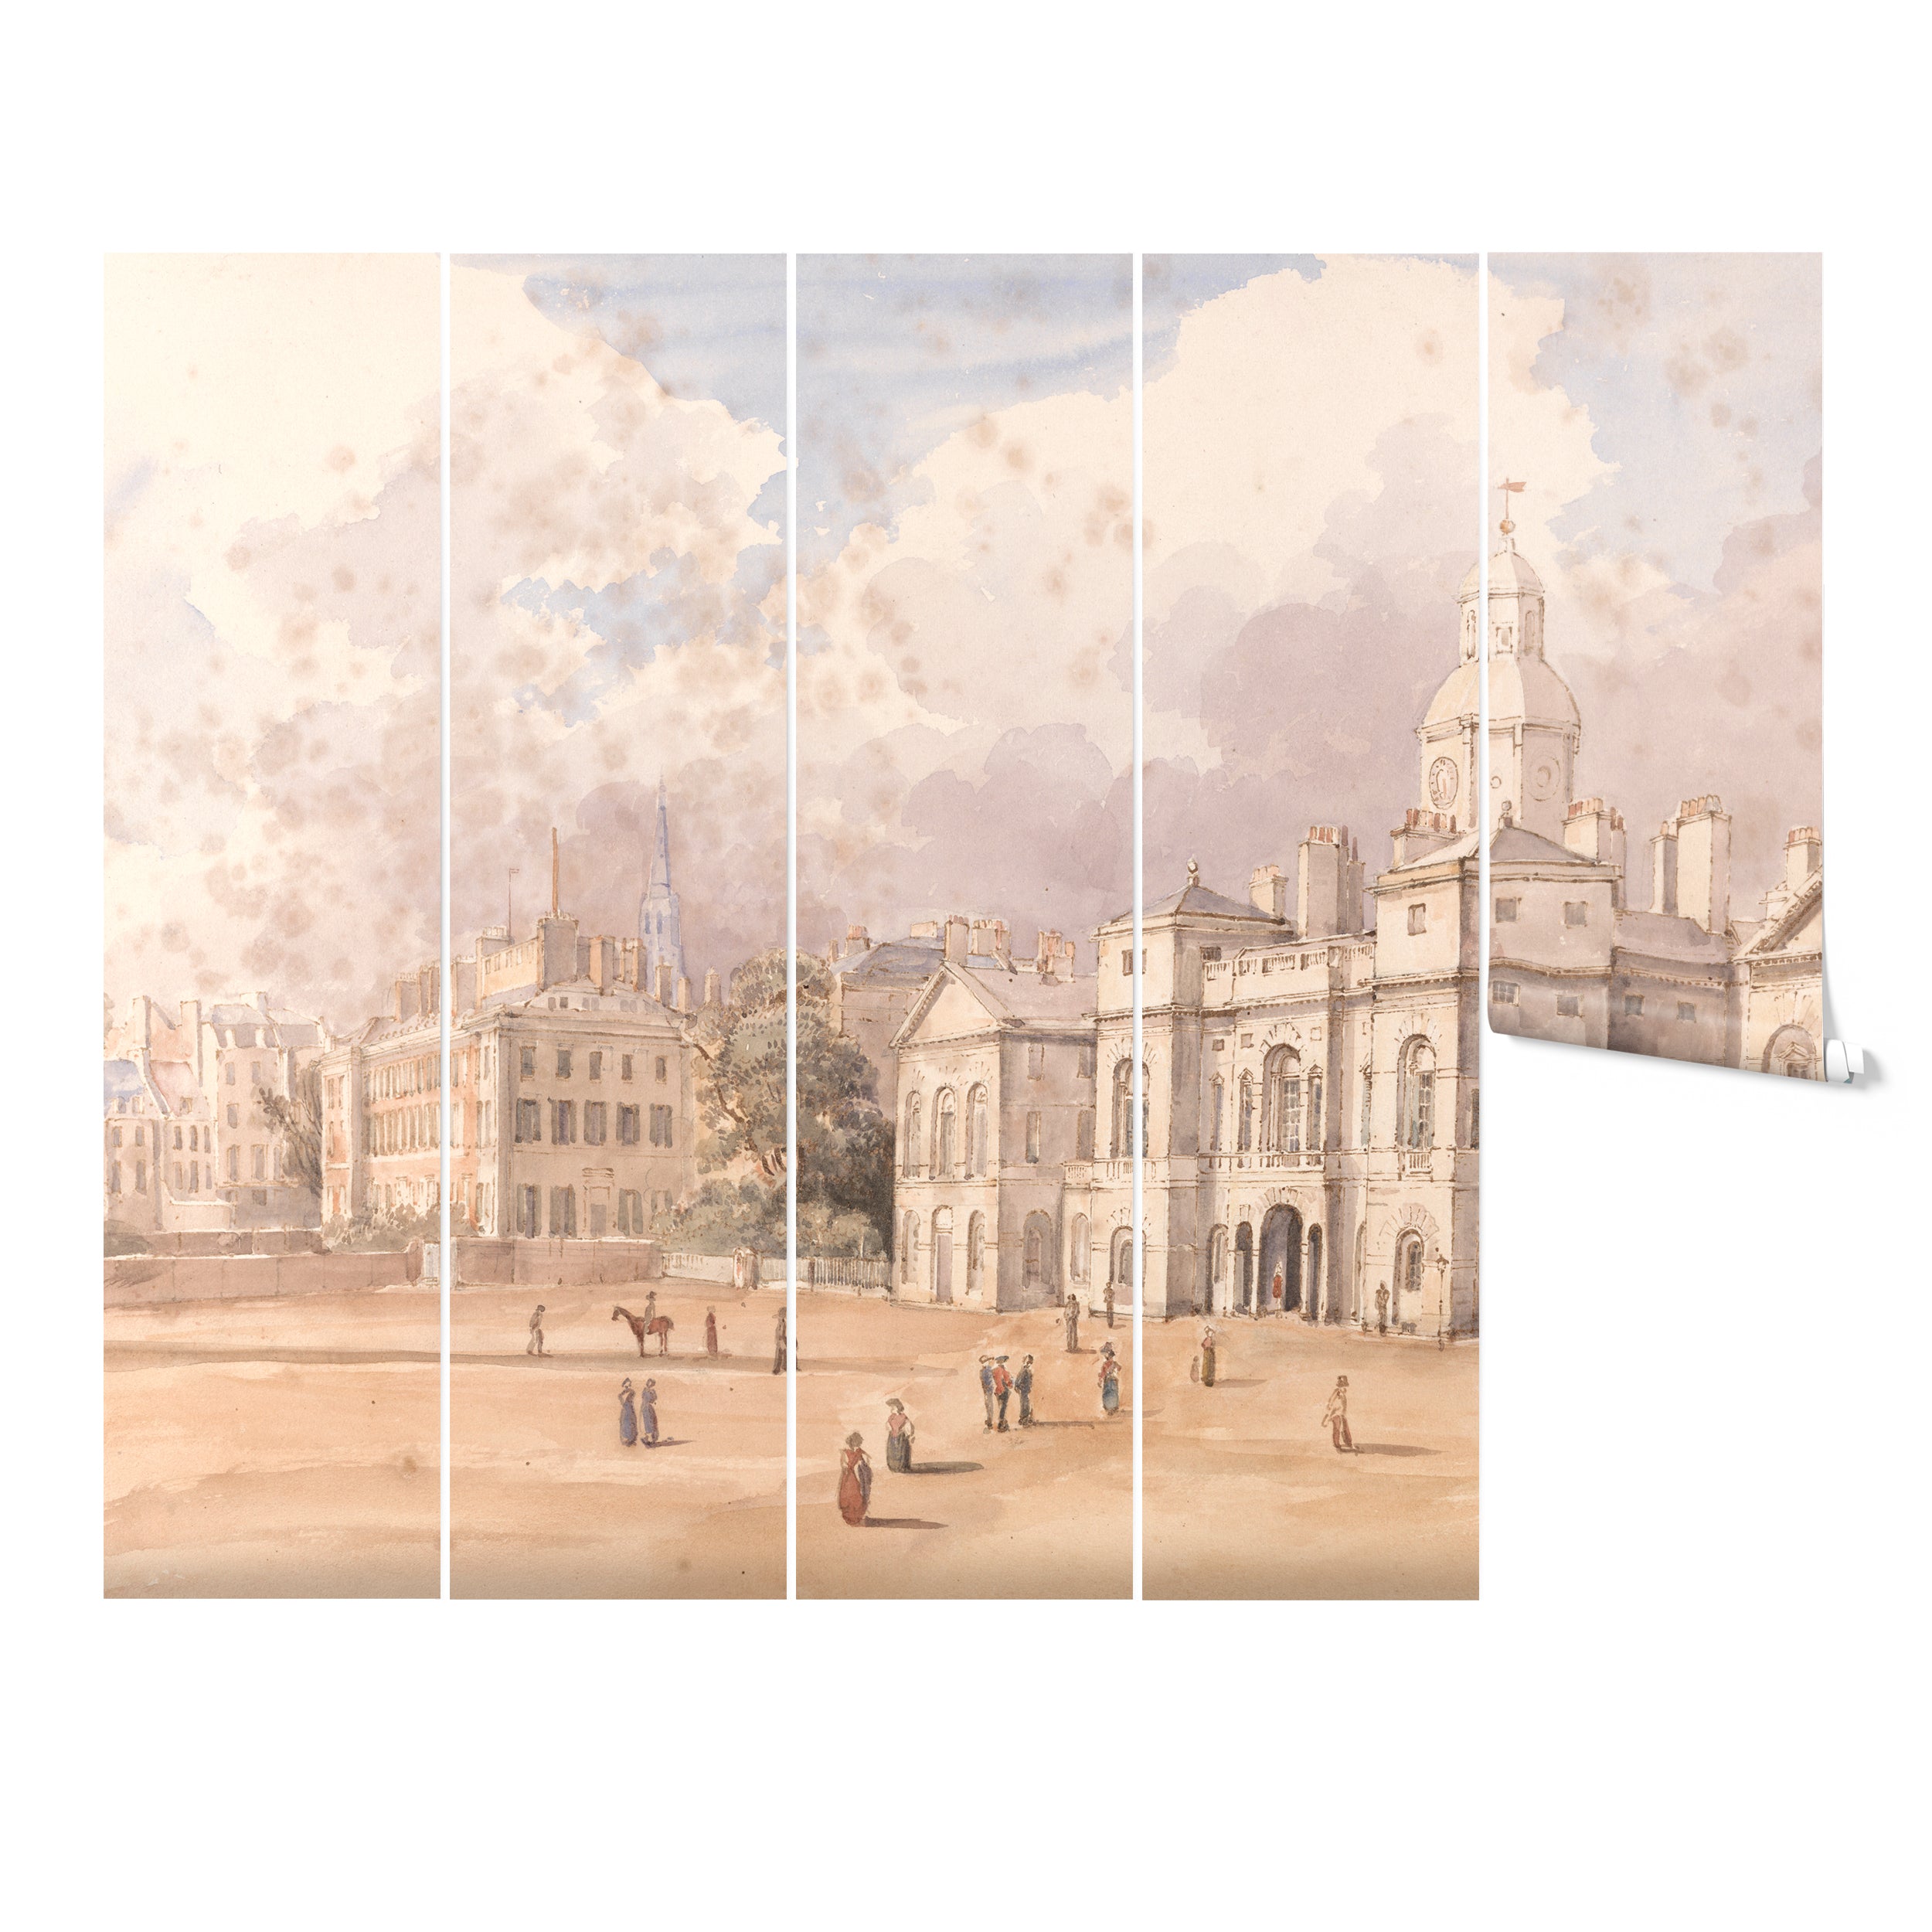 The "Parade" wallpaper mural presented as a series of vertical panels, each panel showcasing segments of the historic cityscape mural, offering a unique decorative element that captures both art and history.